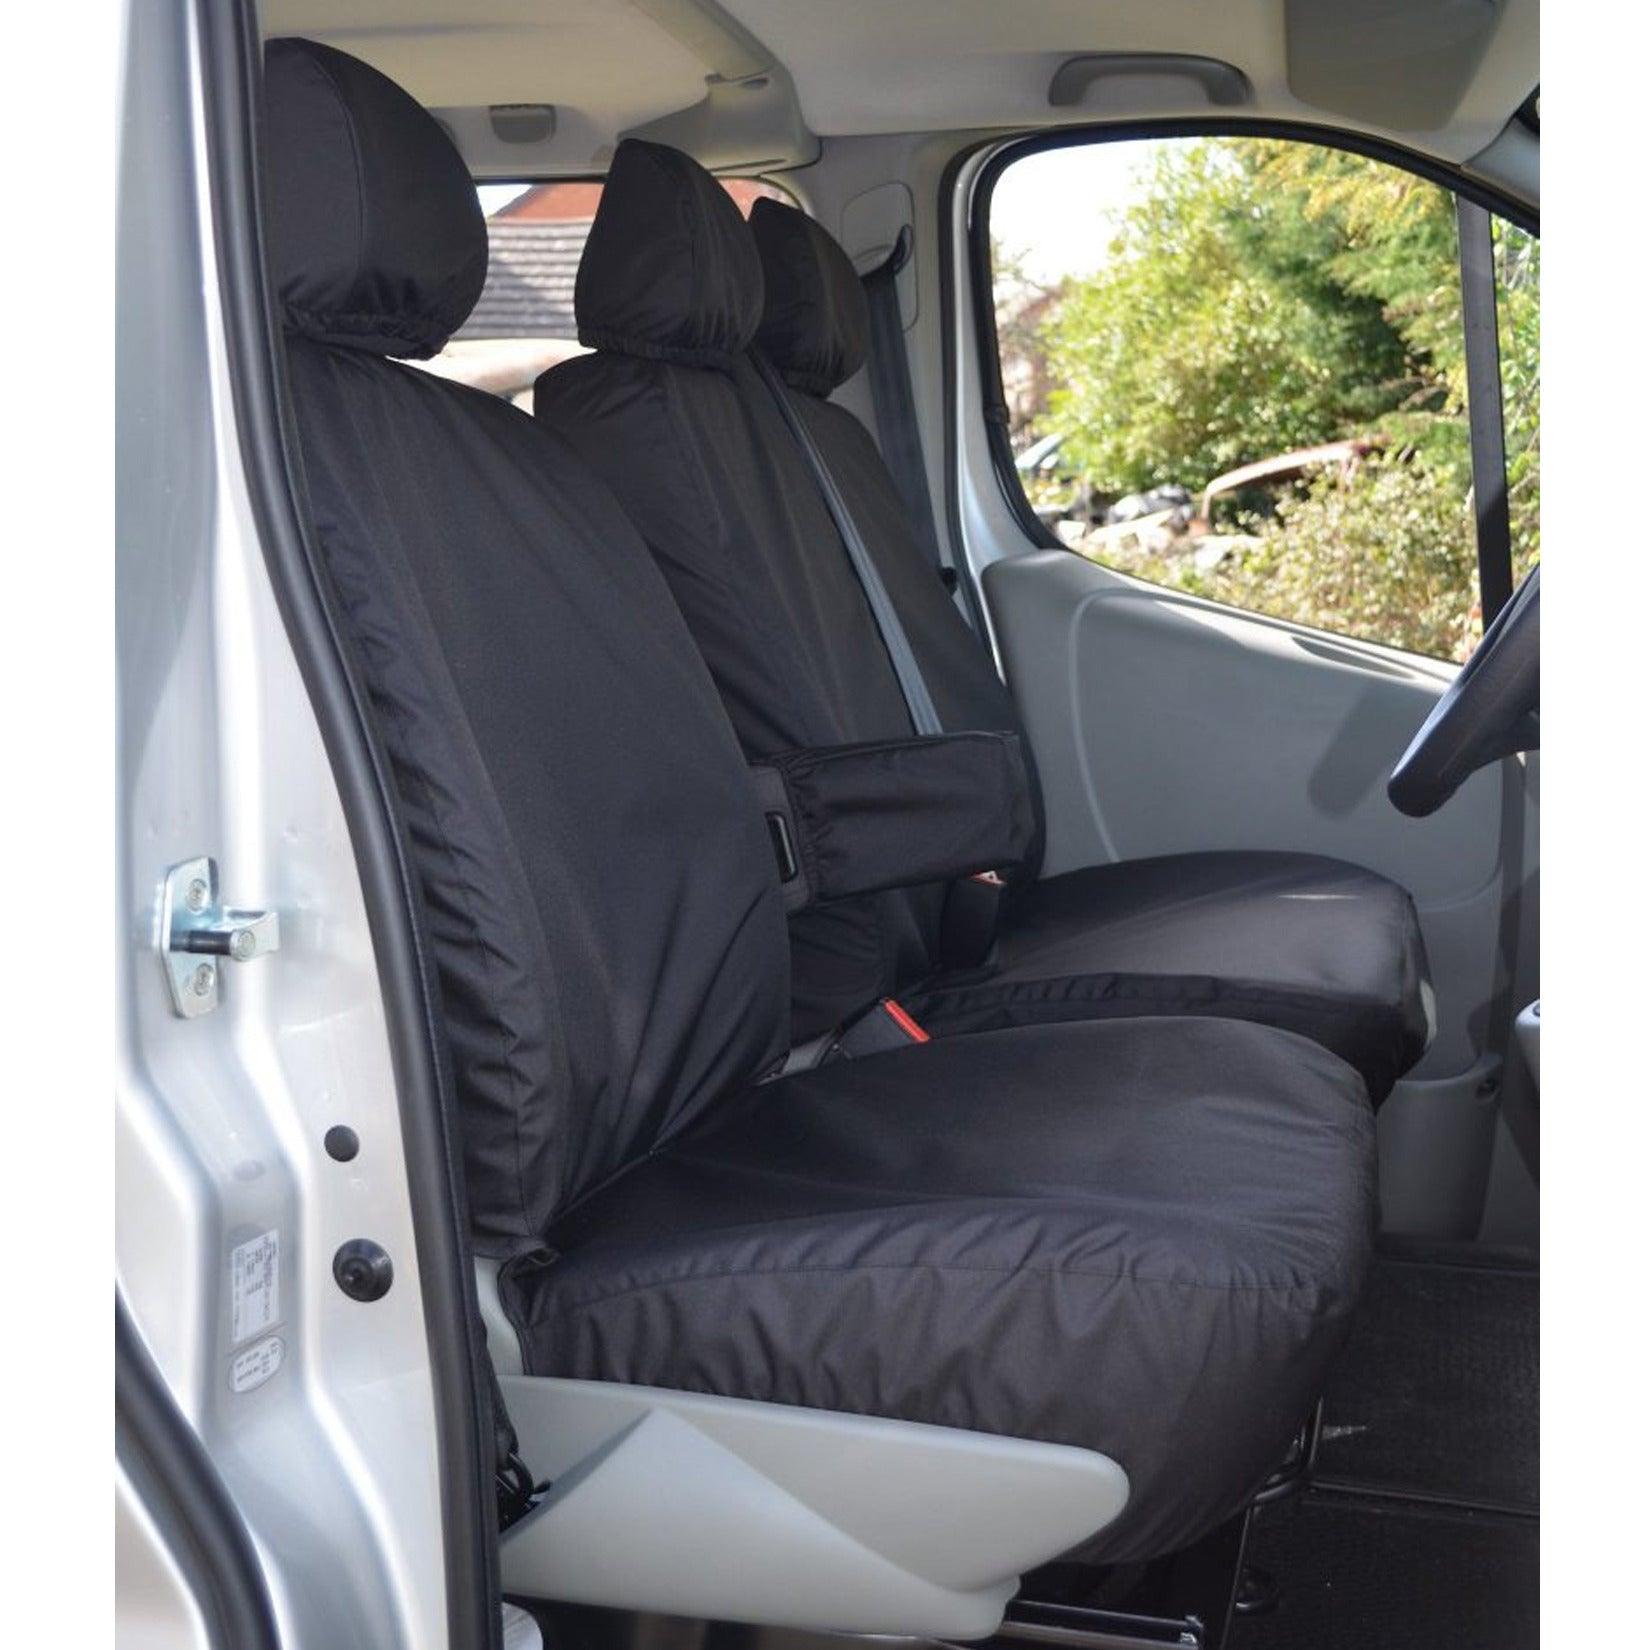 RENAULT TRAFIC 2001-2006 DRIVER (WITH ARMREST) AND FRONT DOUBLE PASSENGER SEAT COVERS - BLACK - Storm Xccessories2